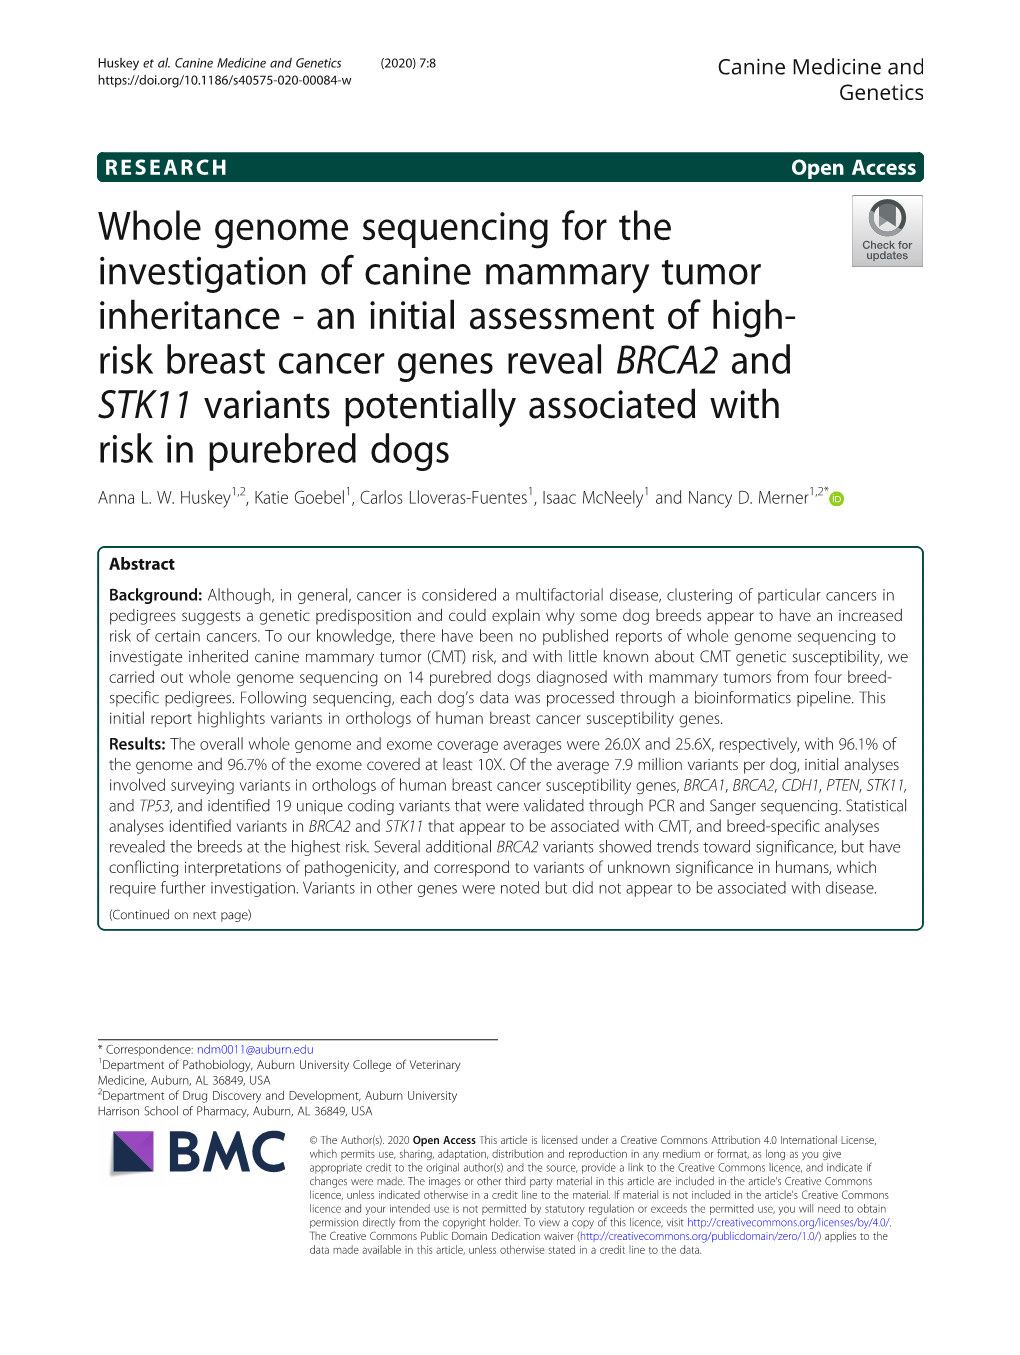 Whole Genome Sequencing for The